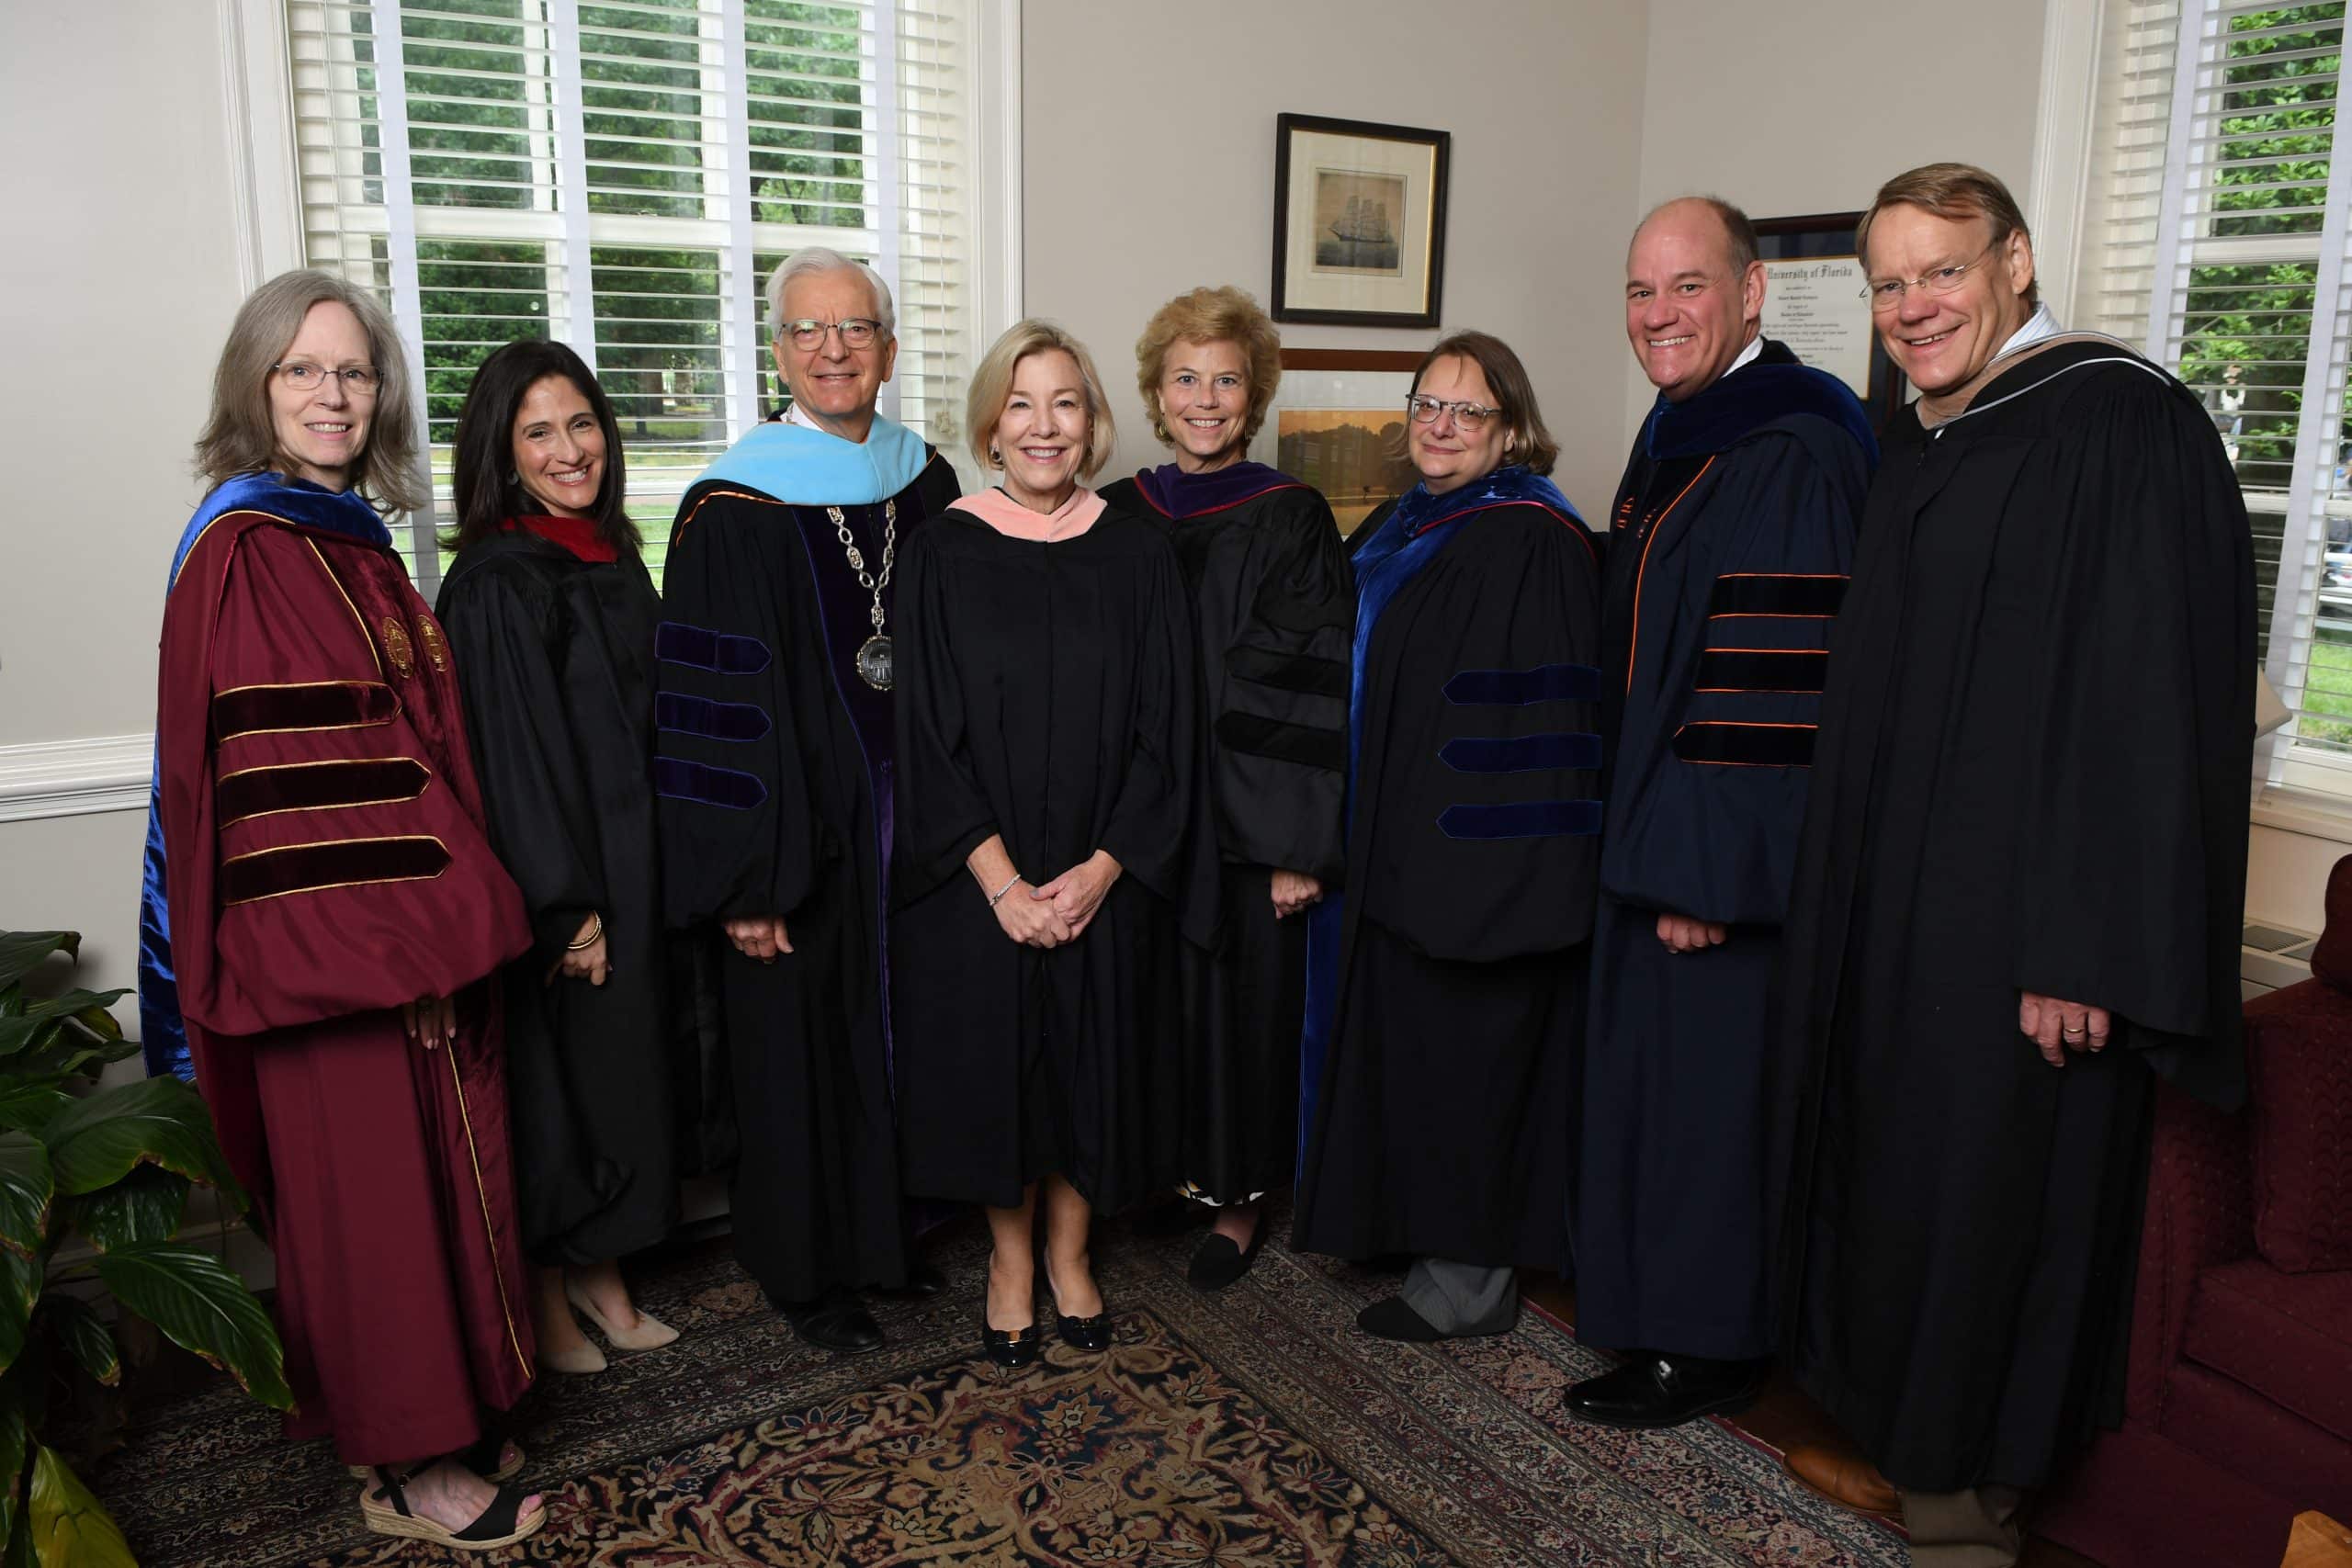 Eight adults in graduation robes